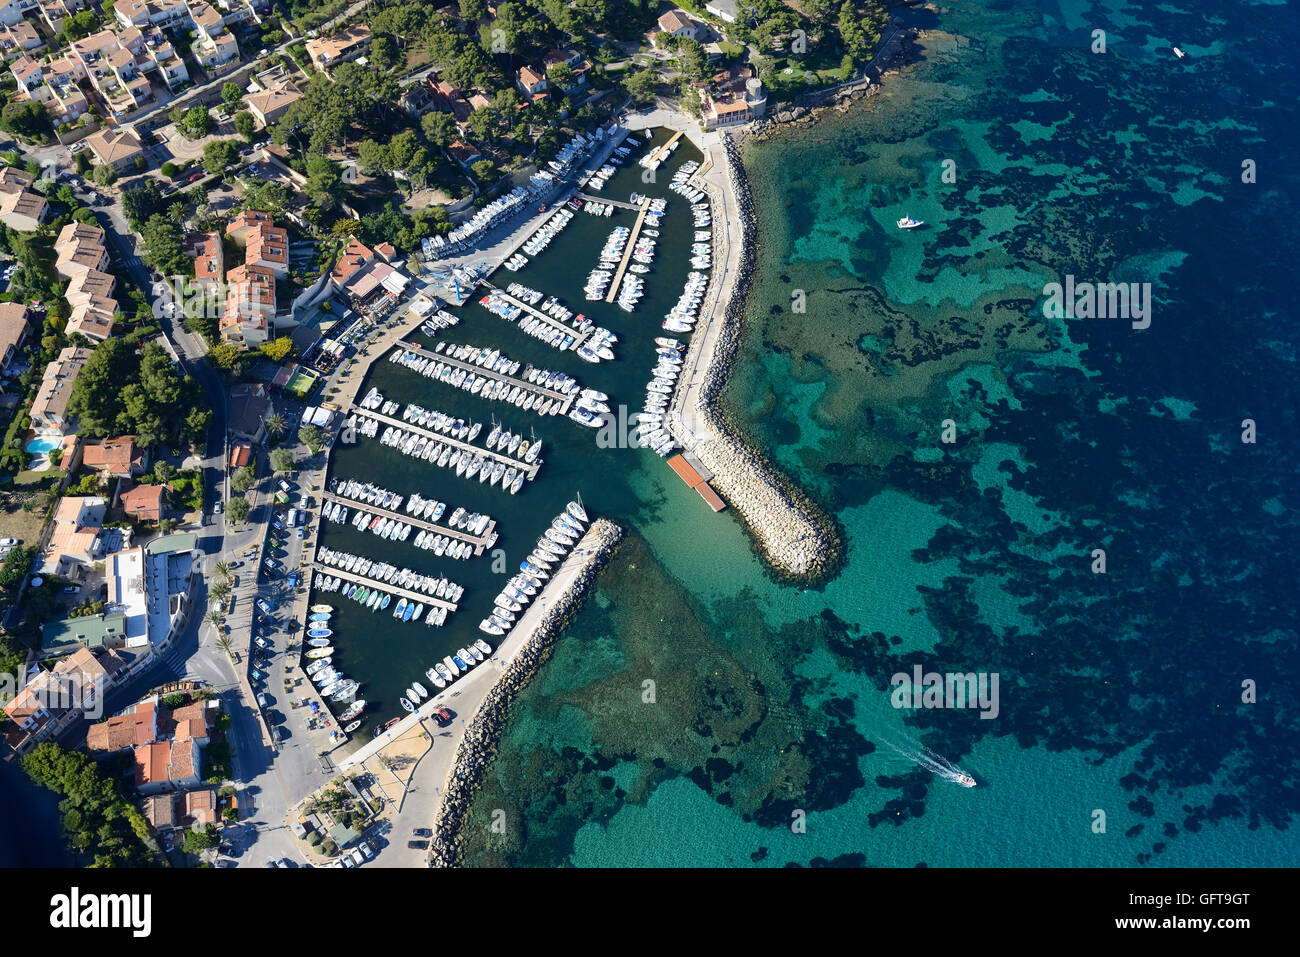 AERIAL VIEW. The small Marina of La Madrague with the colorful seafloor of Bay des Lecques. Saint-Cyr-sur-Mer, Var, Provence, France. Stock Photo